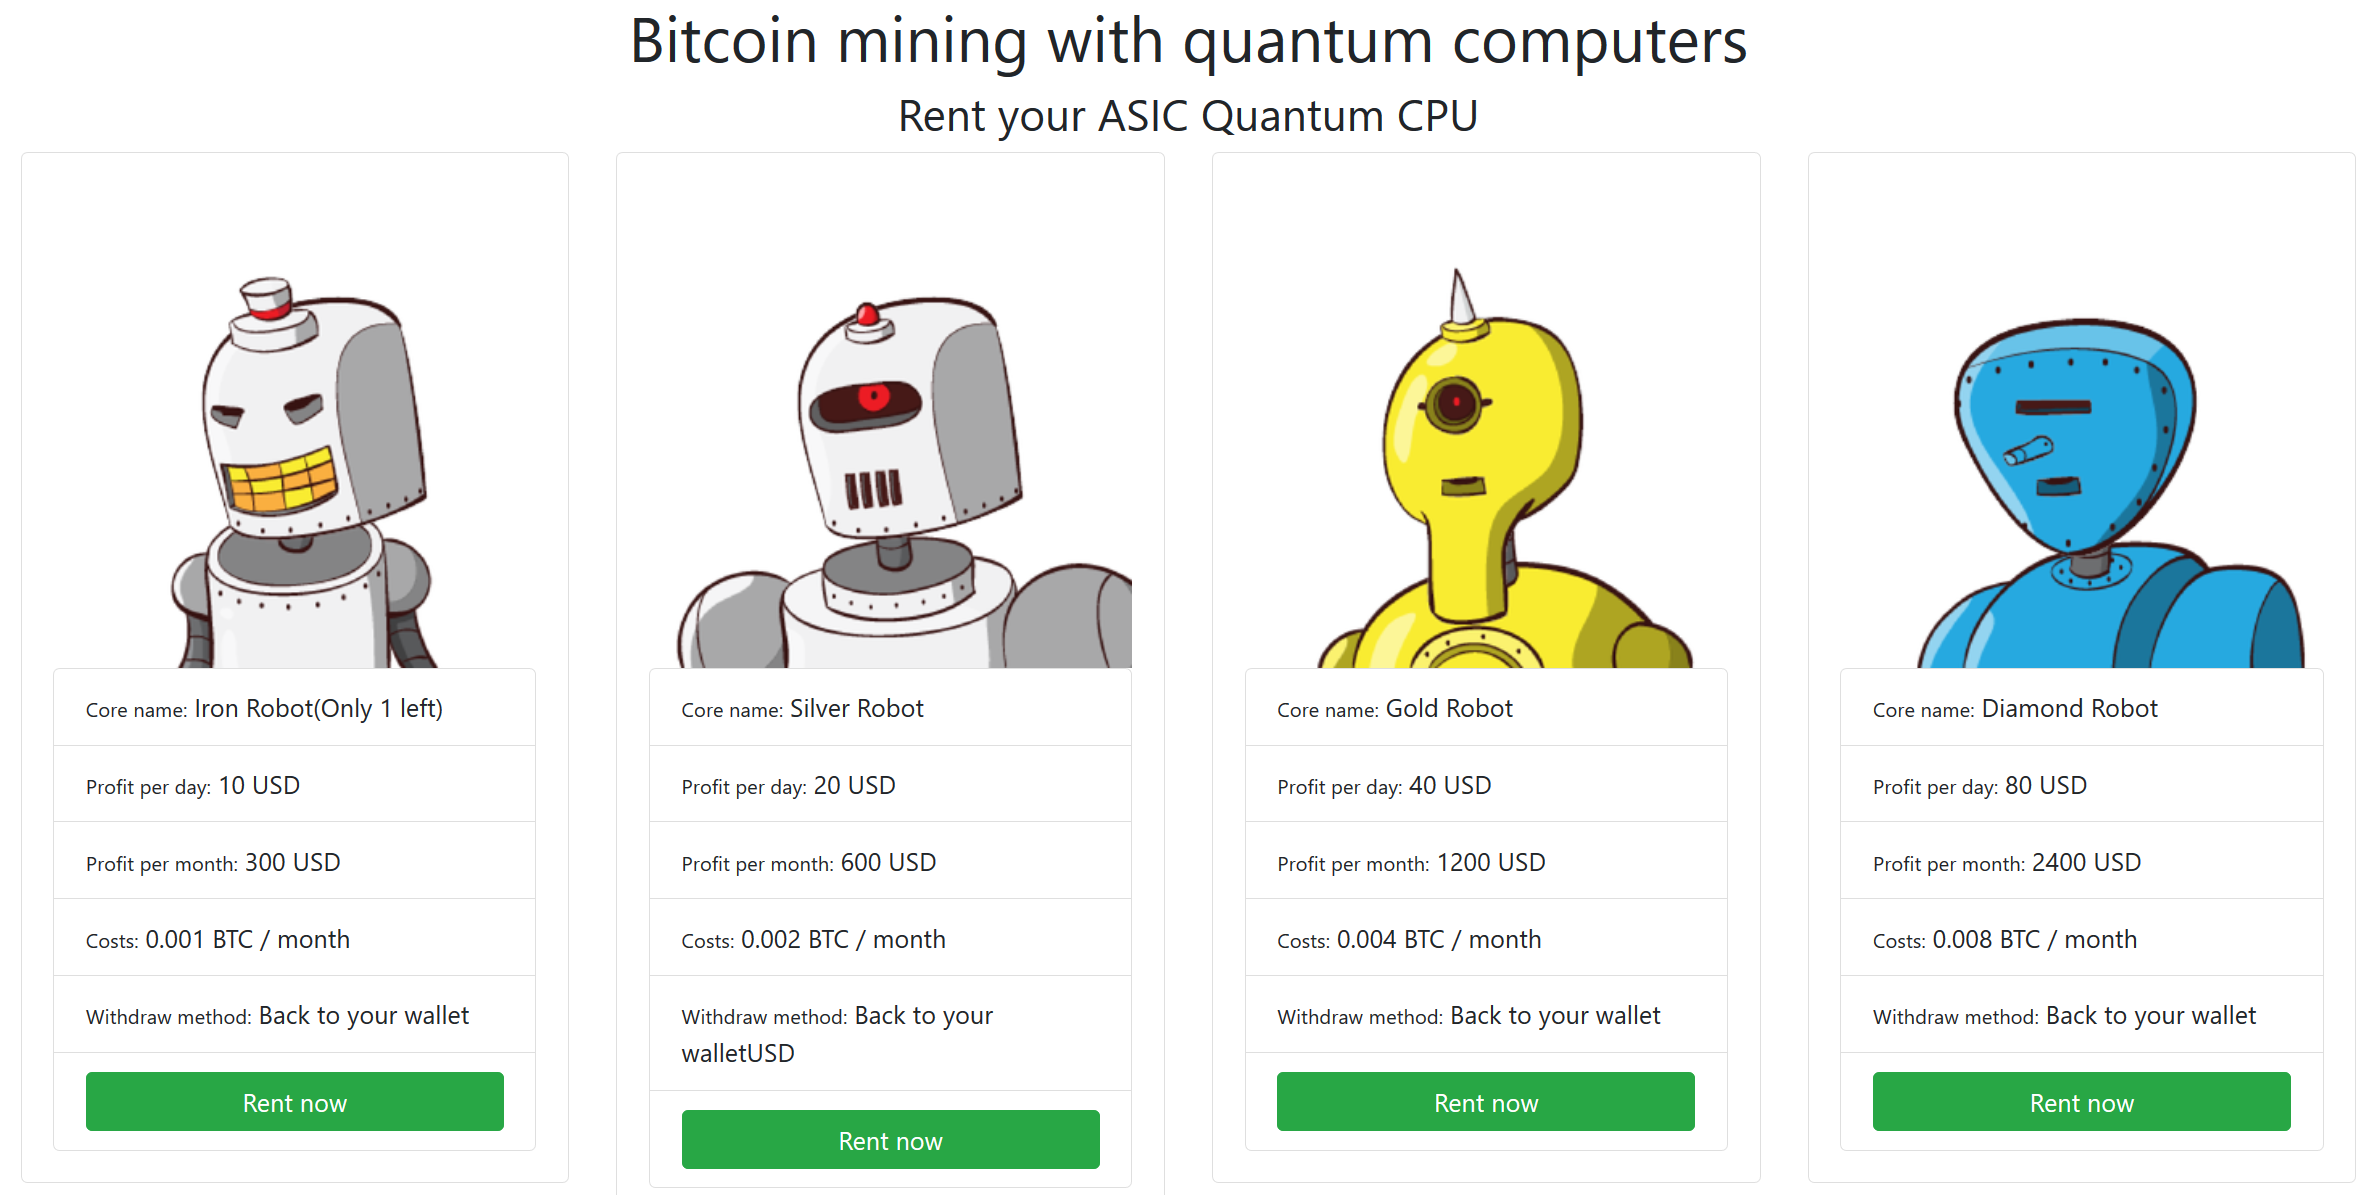 Investigate bitcoin mining with quantum computers case with Maltego.